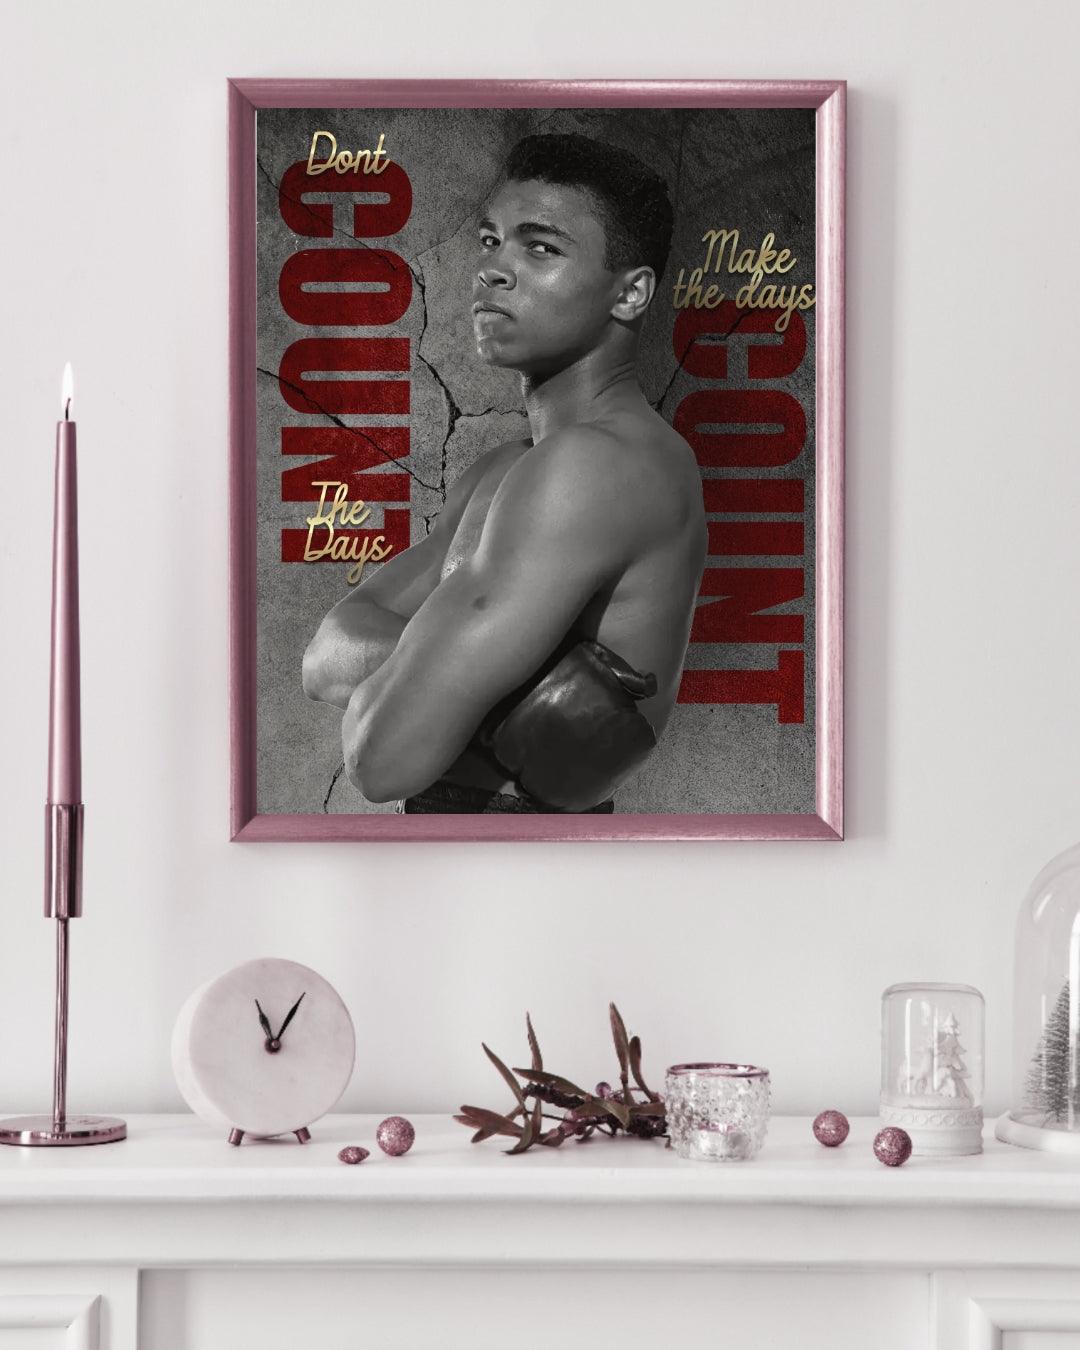 Get this Muhammad Ali Poster and carry his legacy every day